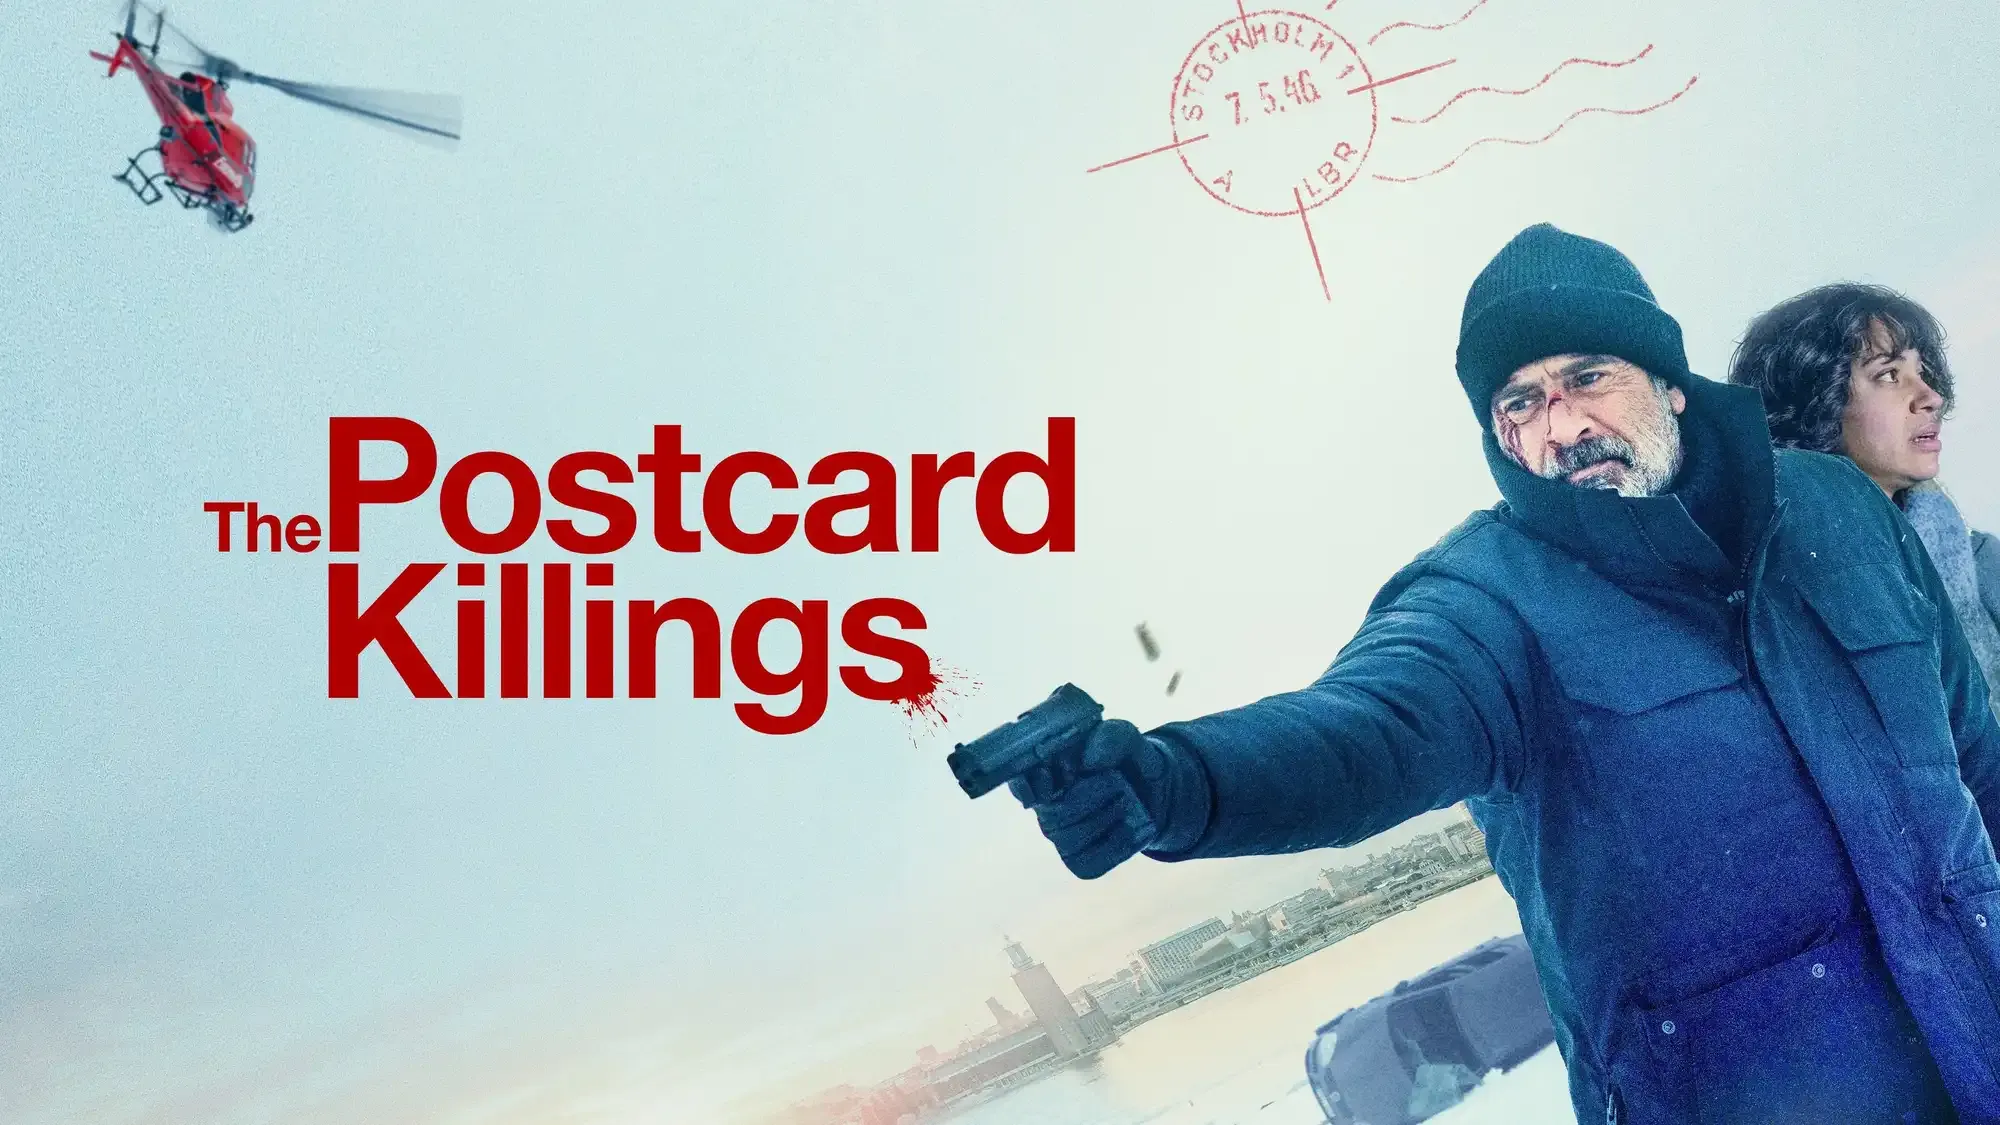 The Postcard Killings movie review